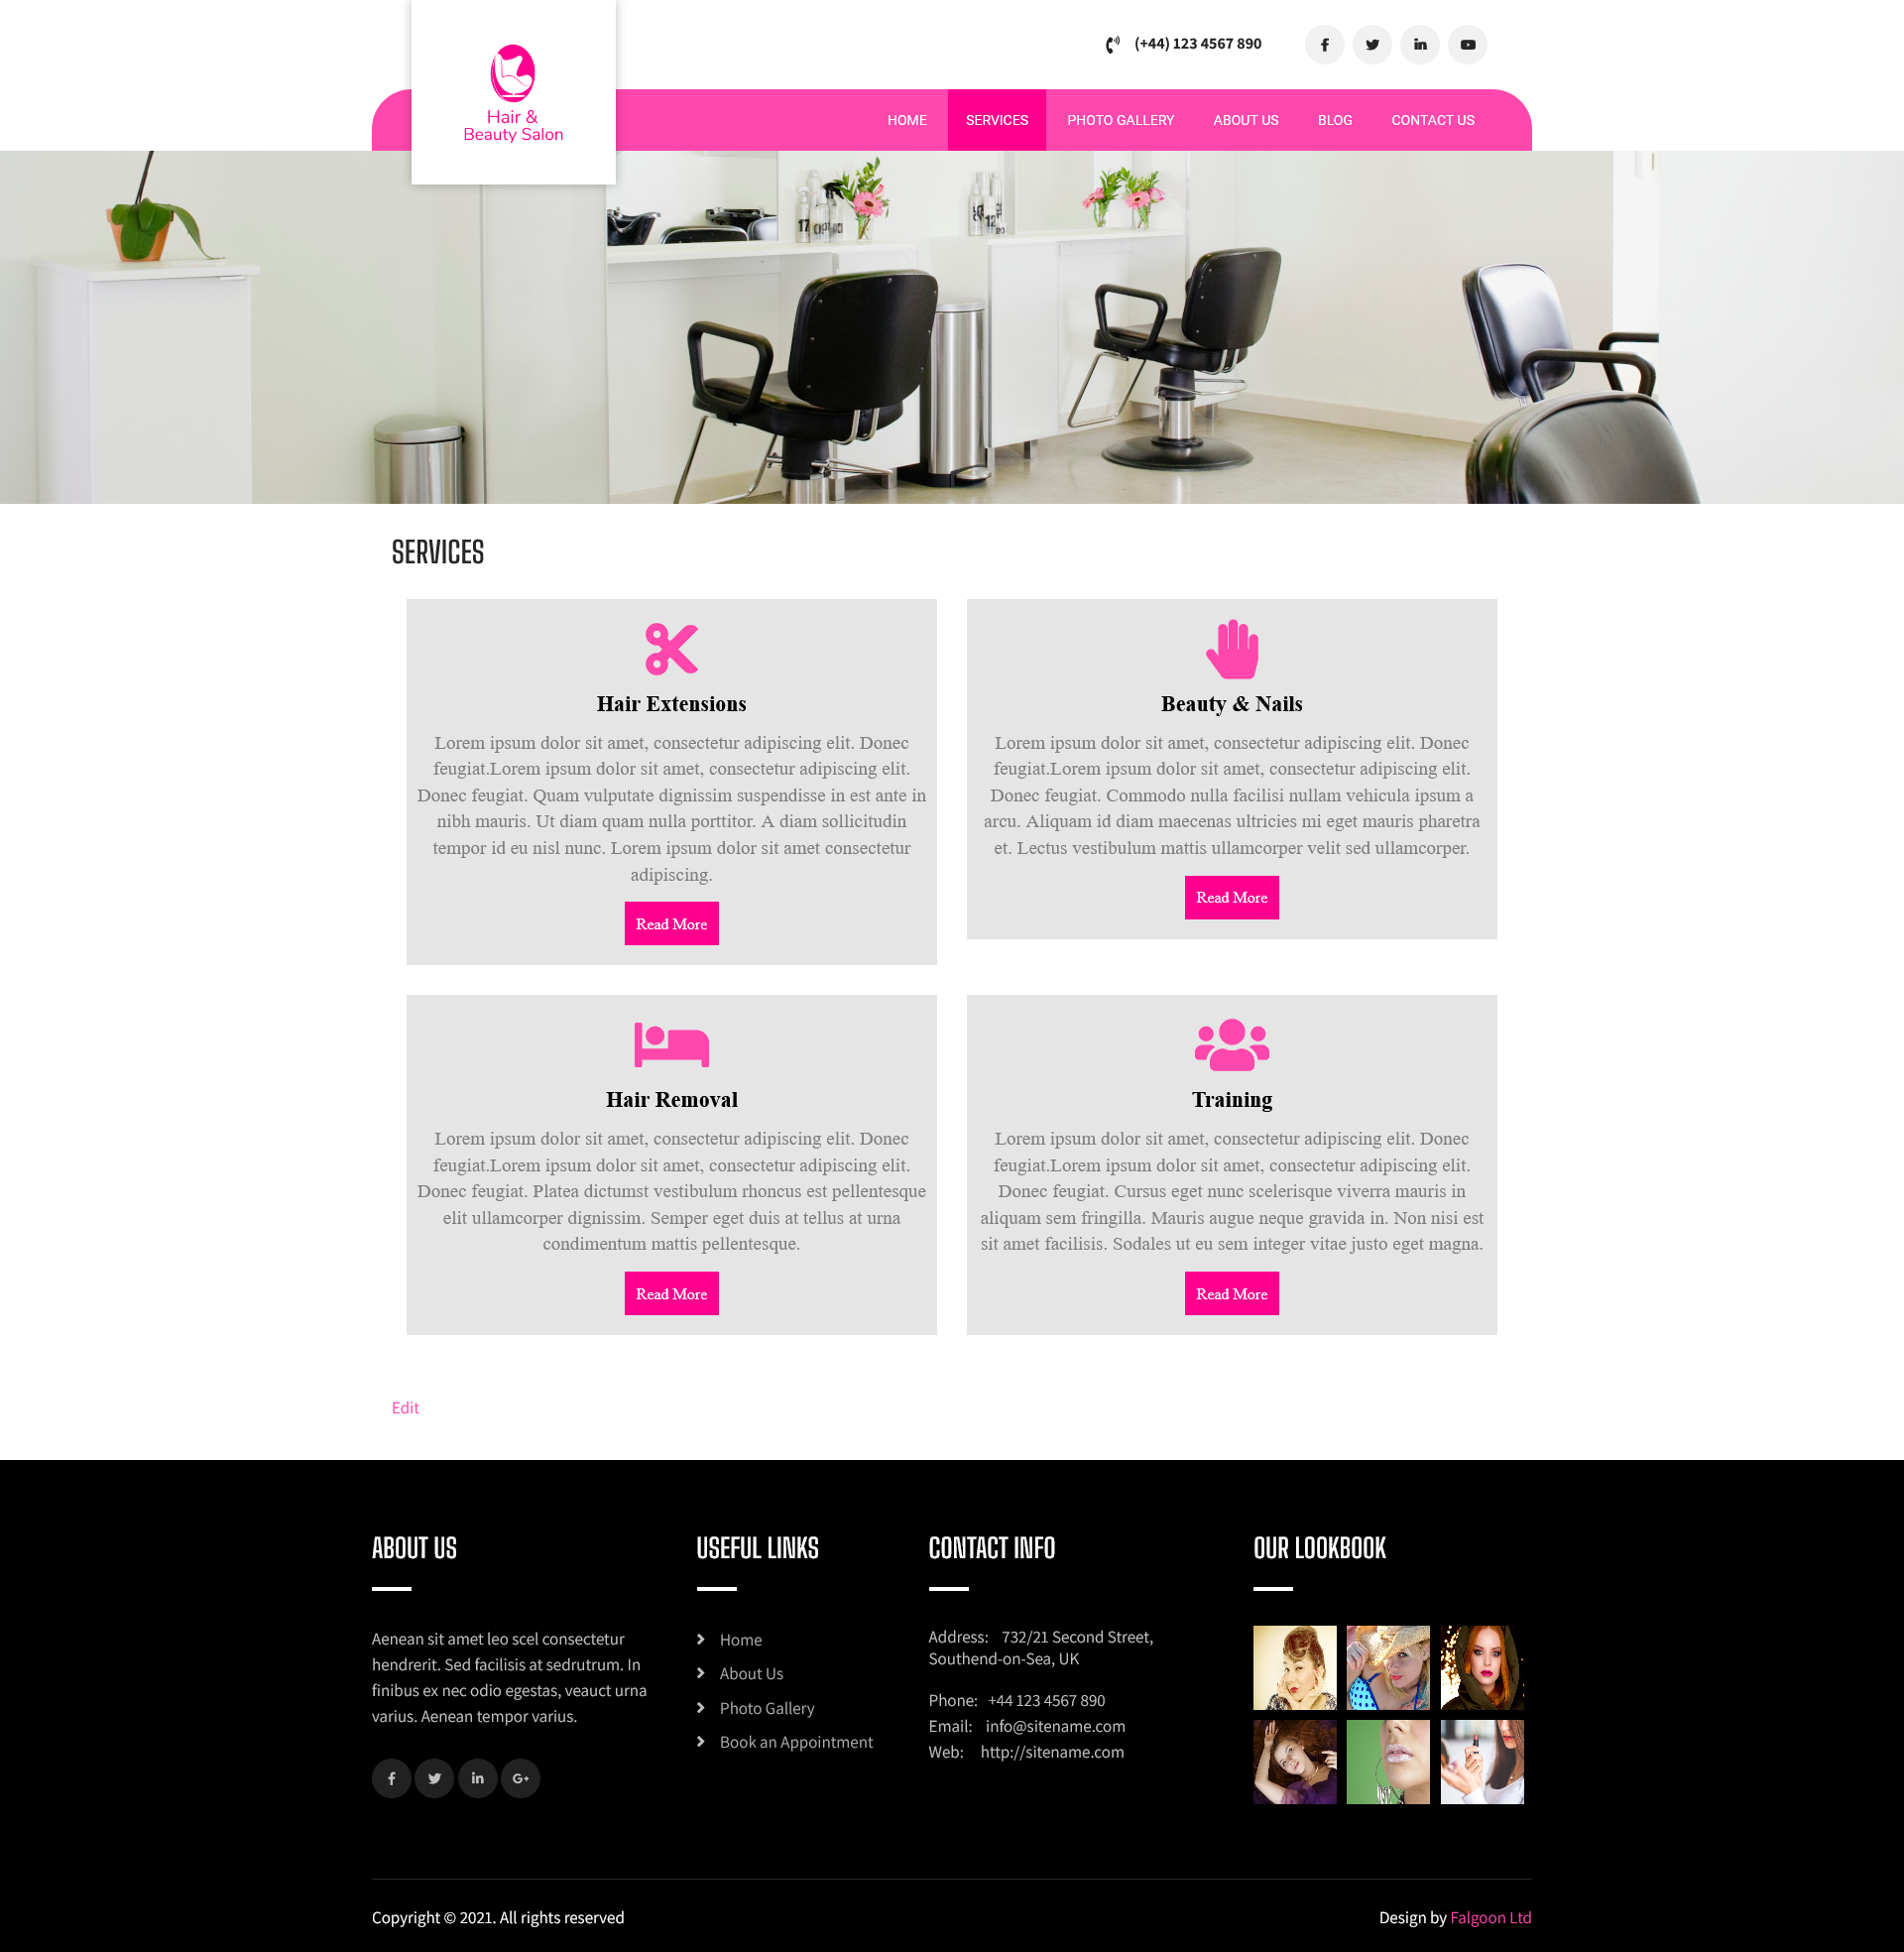 Demo Service page of the Hairdrassers, Beauty/Nail Salons websites